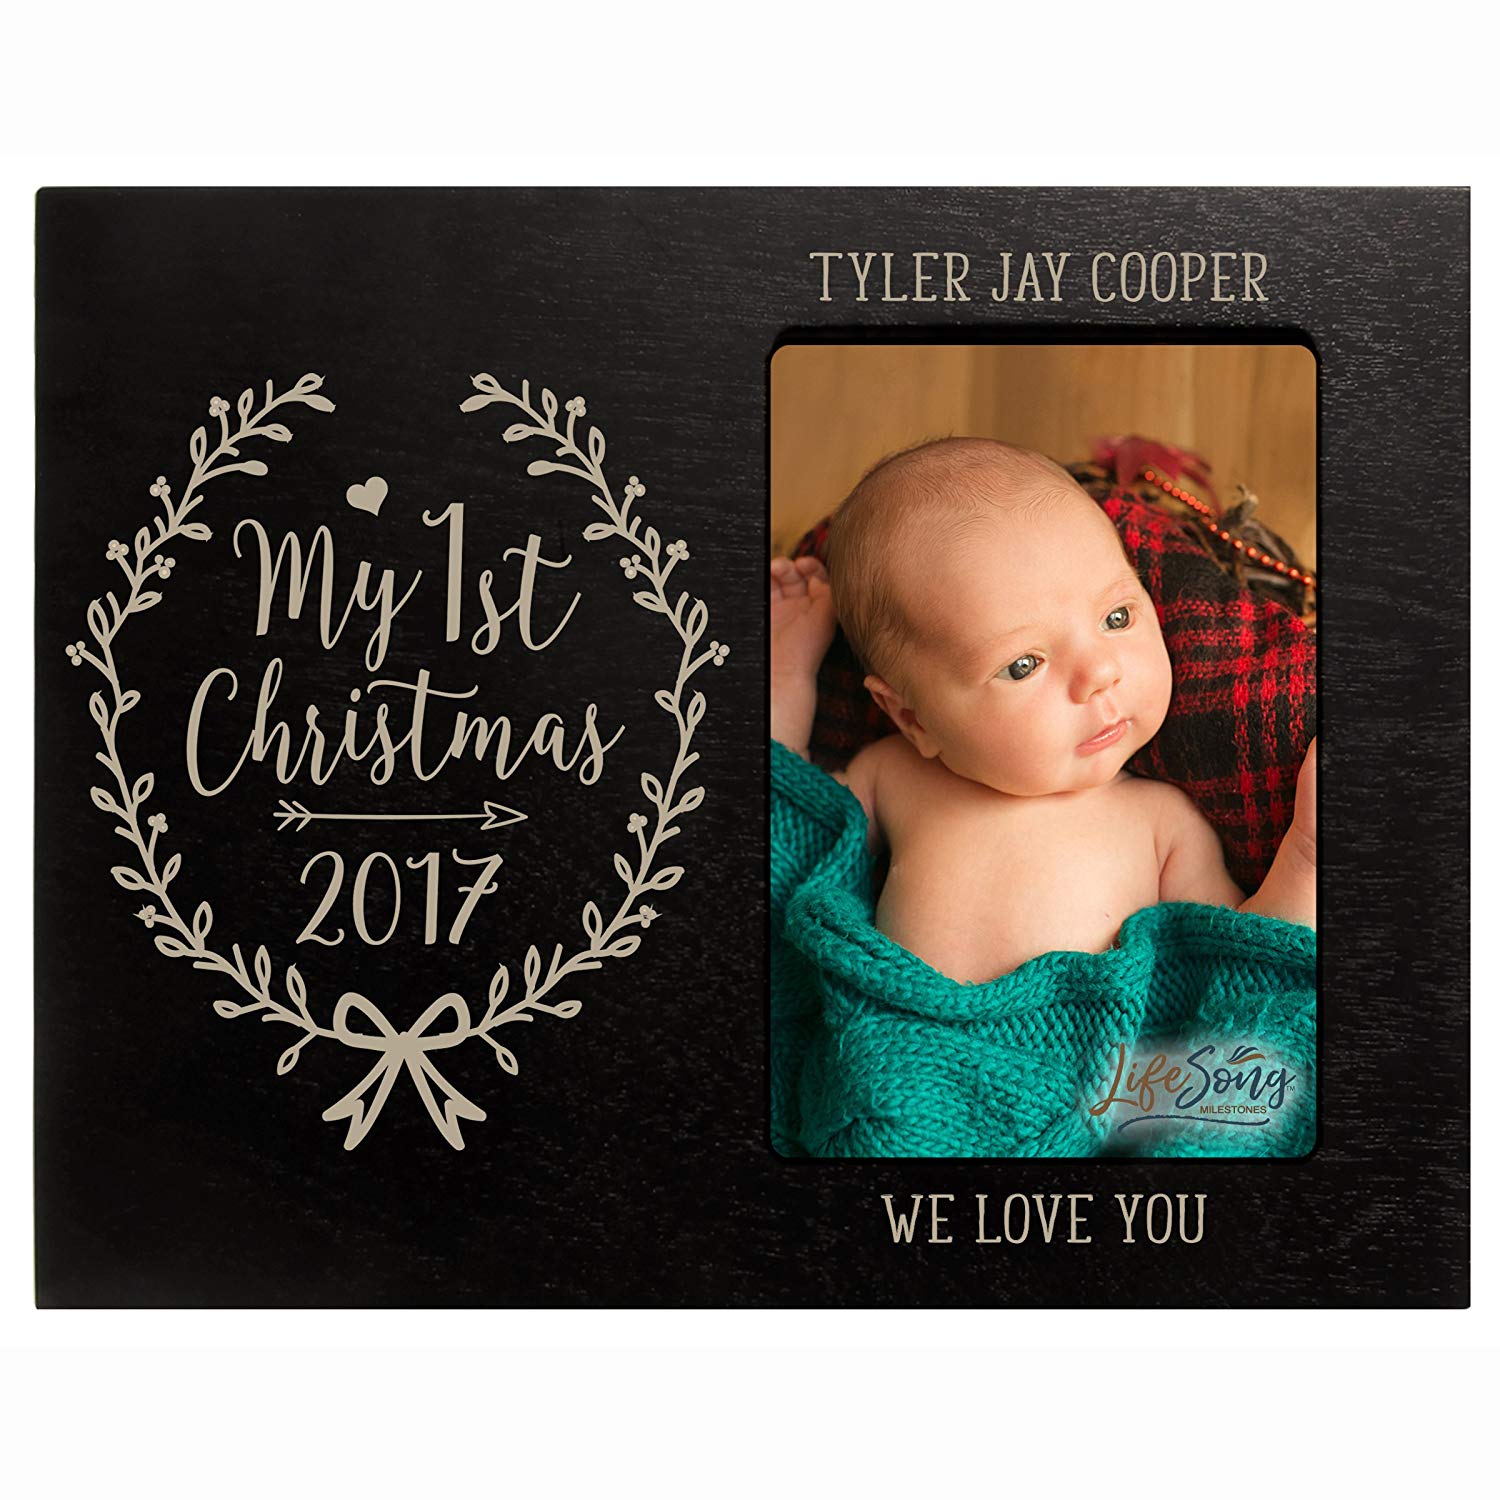 Personalized Home Christmas Arrow Design Photo Frame Holds 4x6 Photograph - LifeSong Milestones